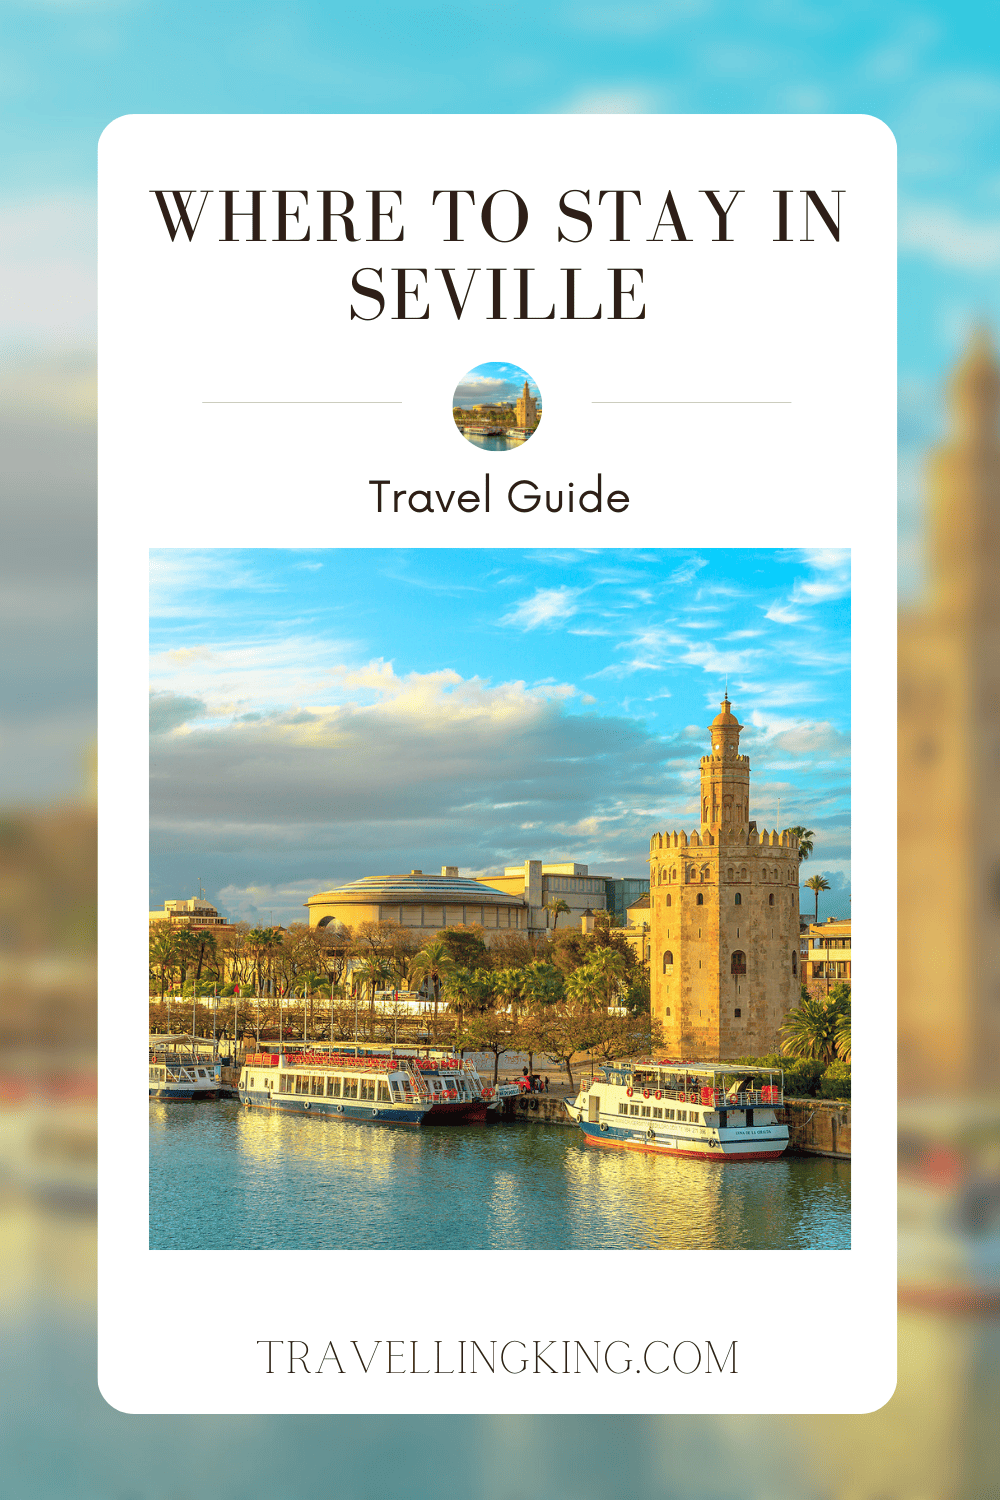 Where to stay in Seville